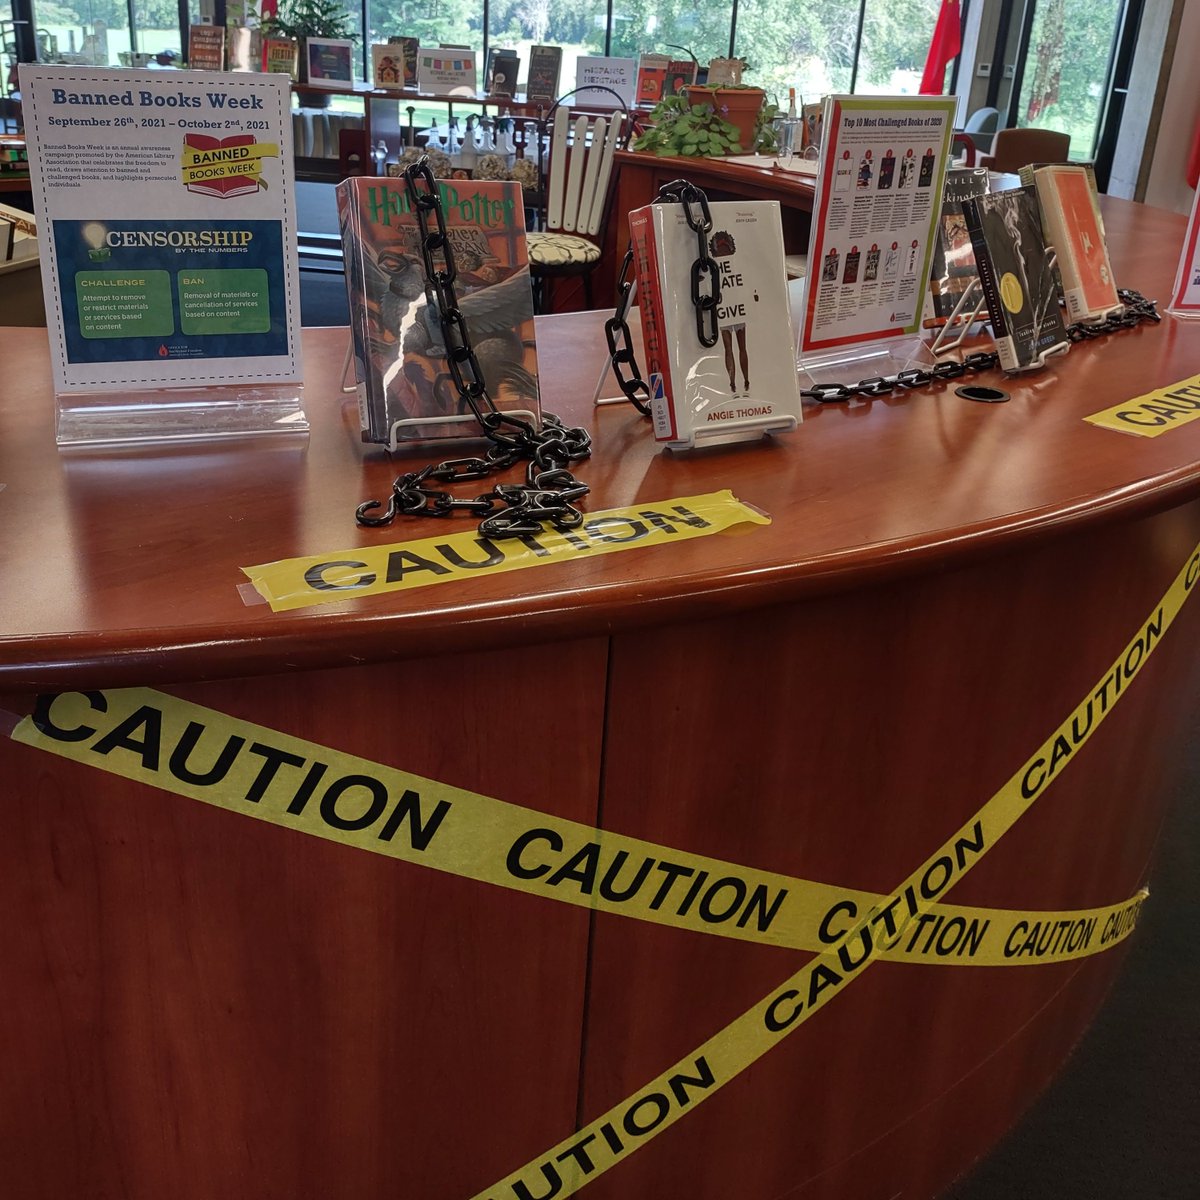 Did you know that The Hate U Give and Harry Potter are banned in some schools and libraries? Visit the KBL to learn about Banned Books Week, an annual awareness campaign that celebrates the freedom to read and draws attention to banned and challenged books. #ala  
@loomischaffee https://t.co/0mS1p6RoFK